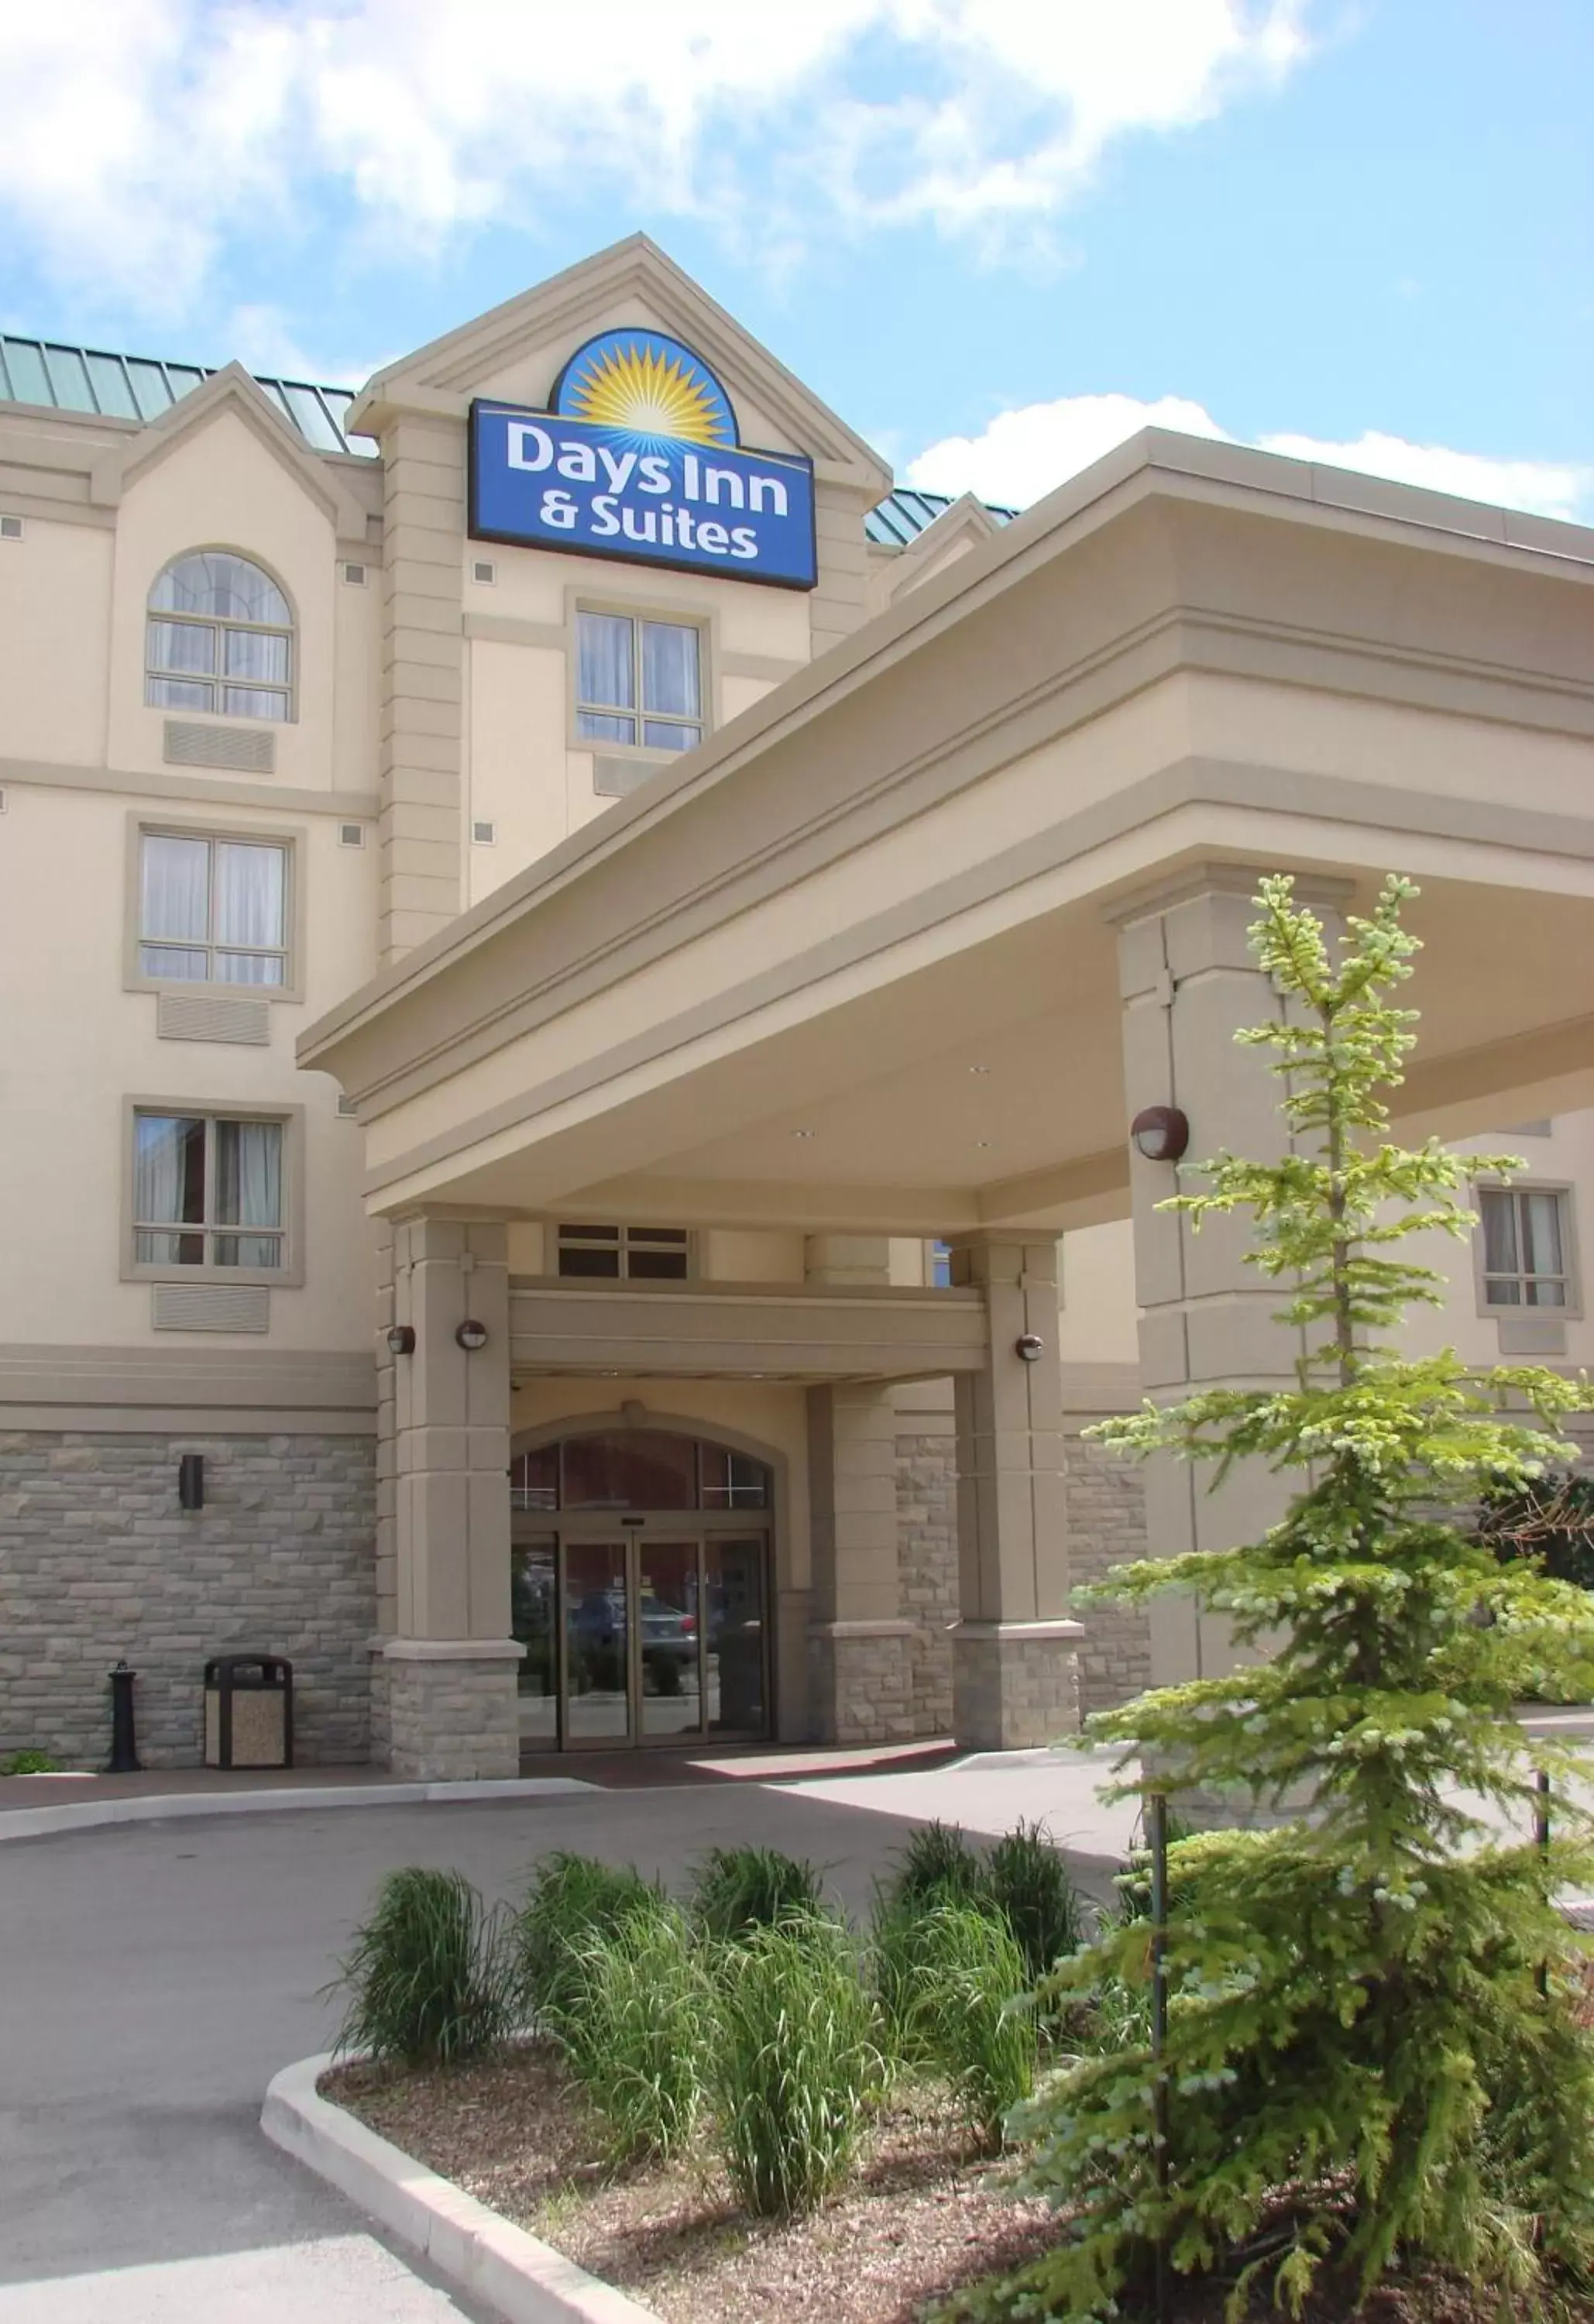 Facade/entrance, Property Building in Days Inn & Suites by Wyndham Collingwood